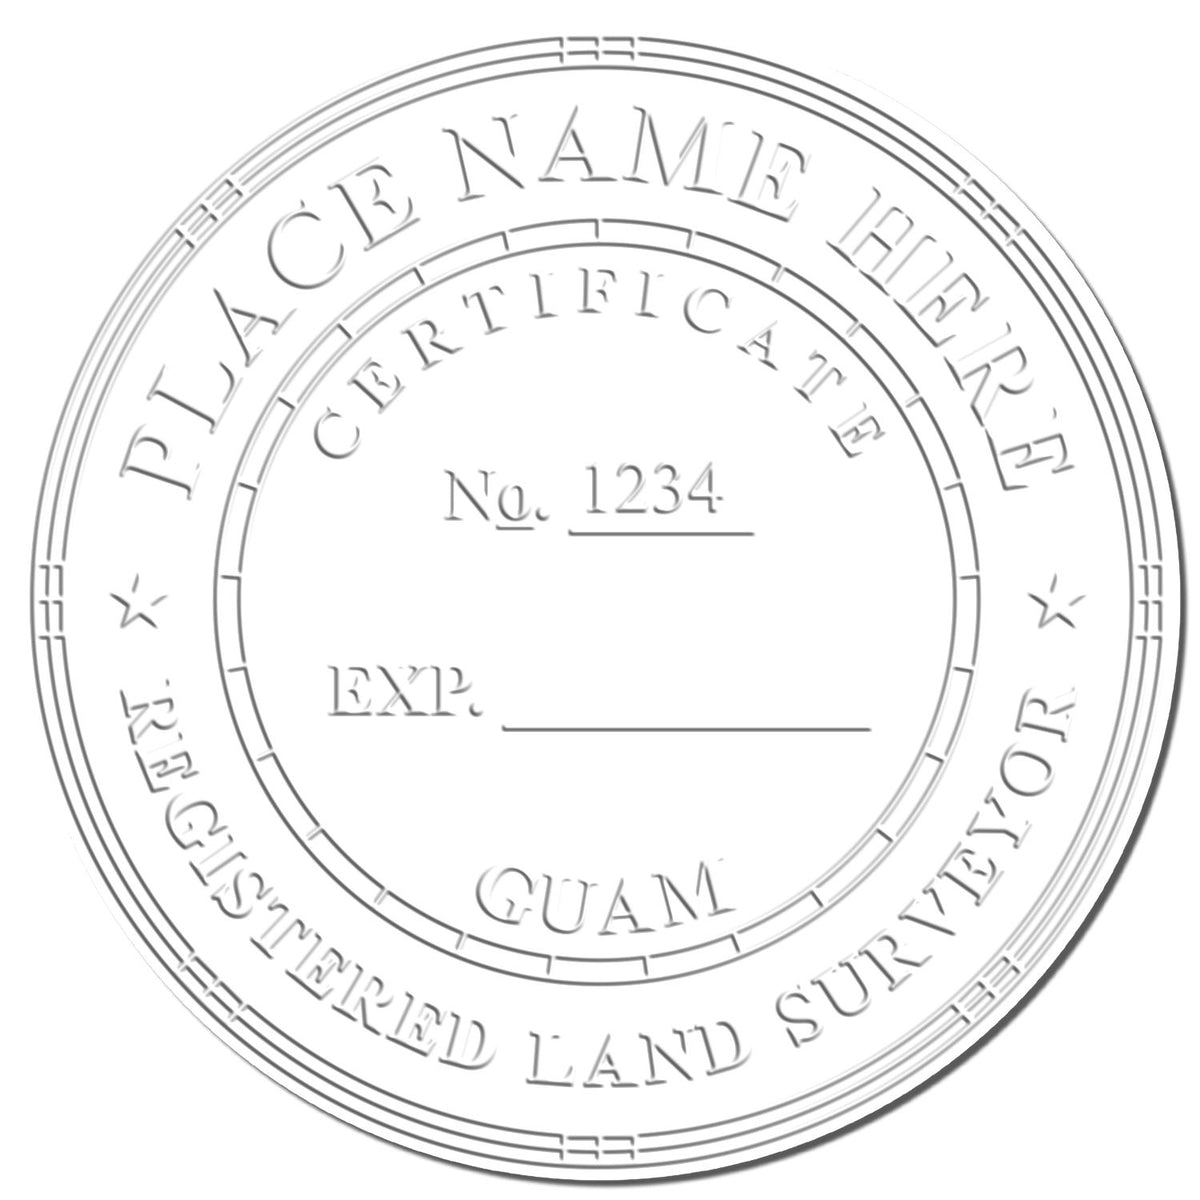 This paper is stamped with a sample imprint of the Extended Long Reach Guam Surveyor Embosser, signifying its quality and reliability.